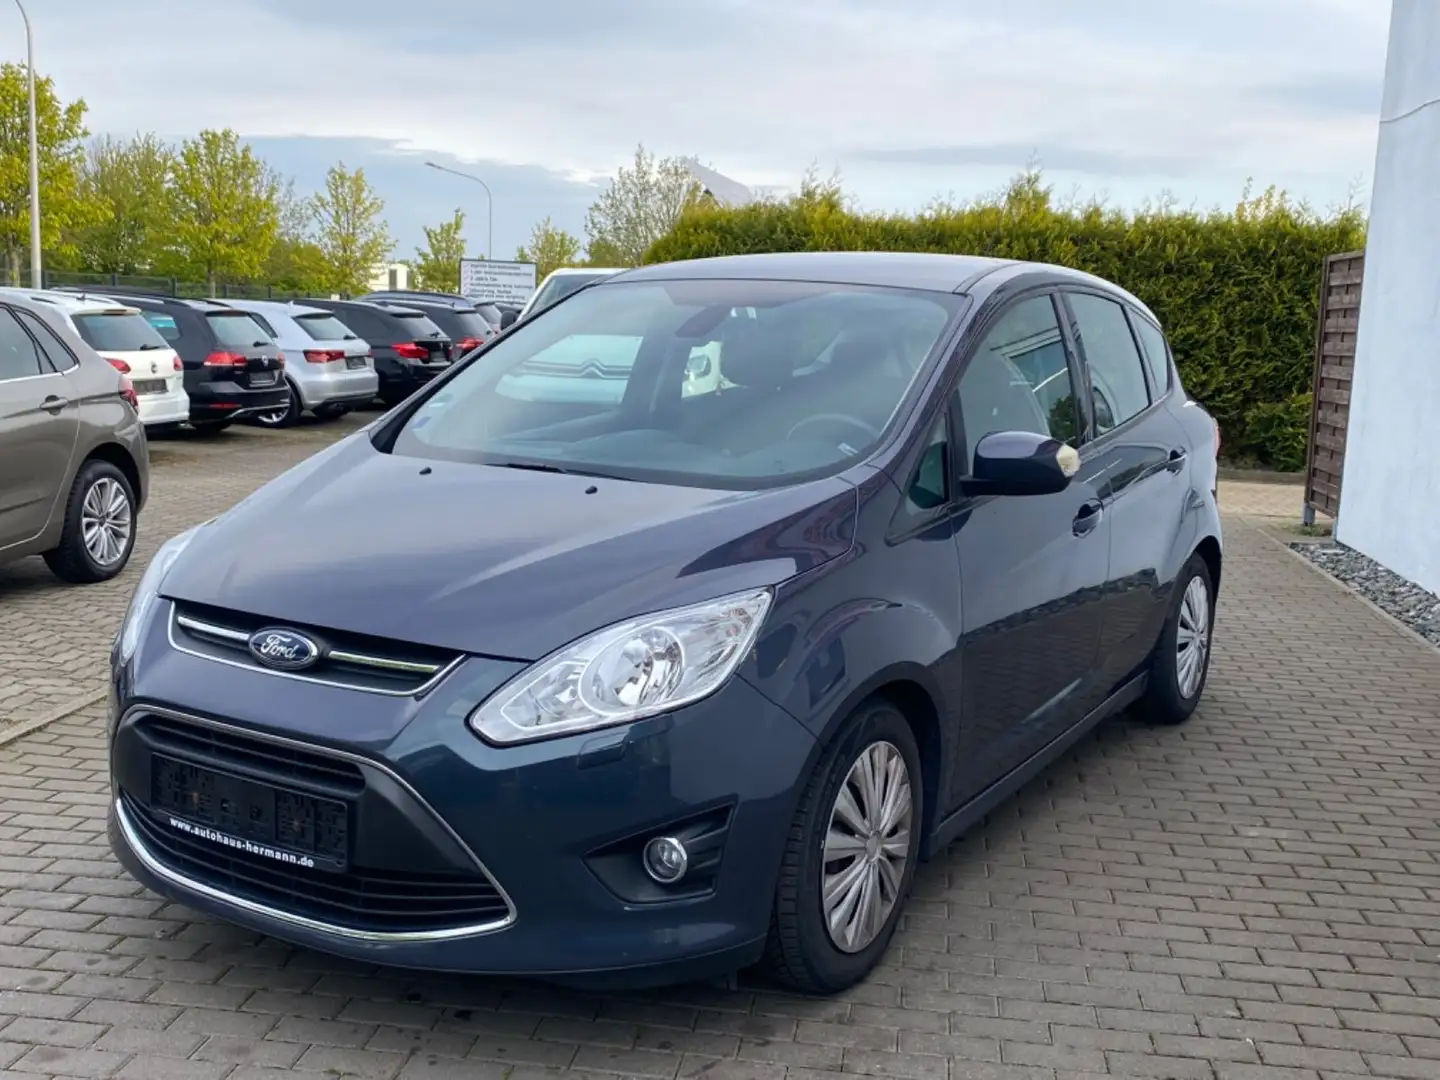 Ford C-Max C-MAX Trend 1.6 /KLIMA/6-GANG/EURO5/PDC siva - 2